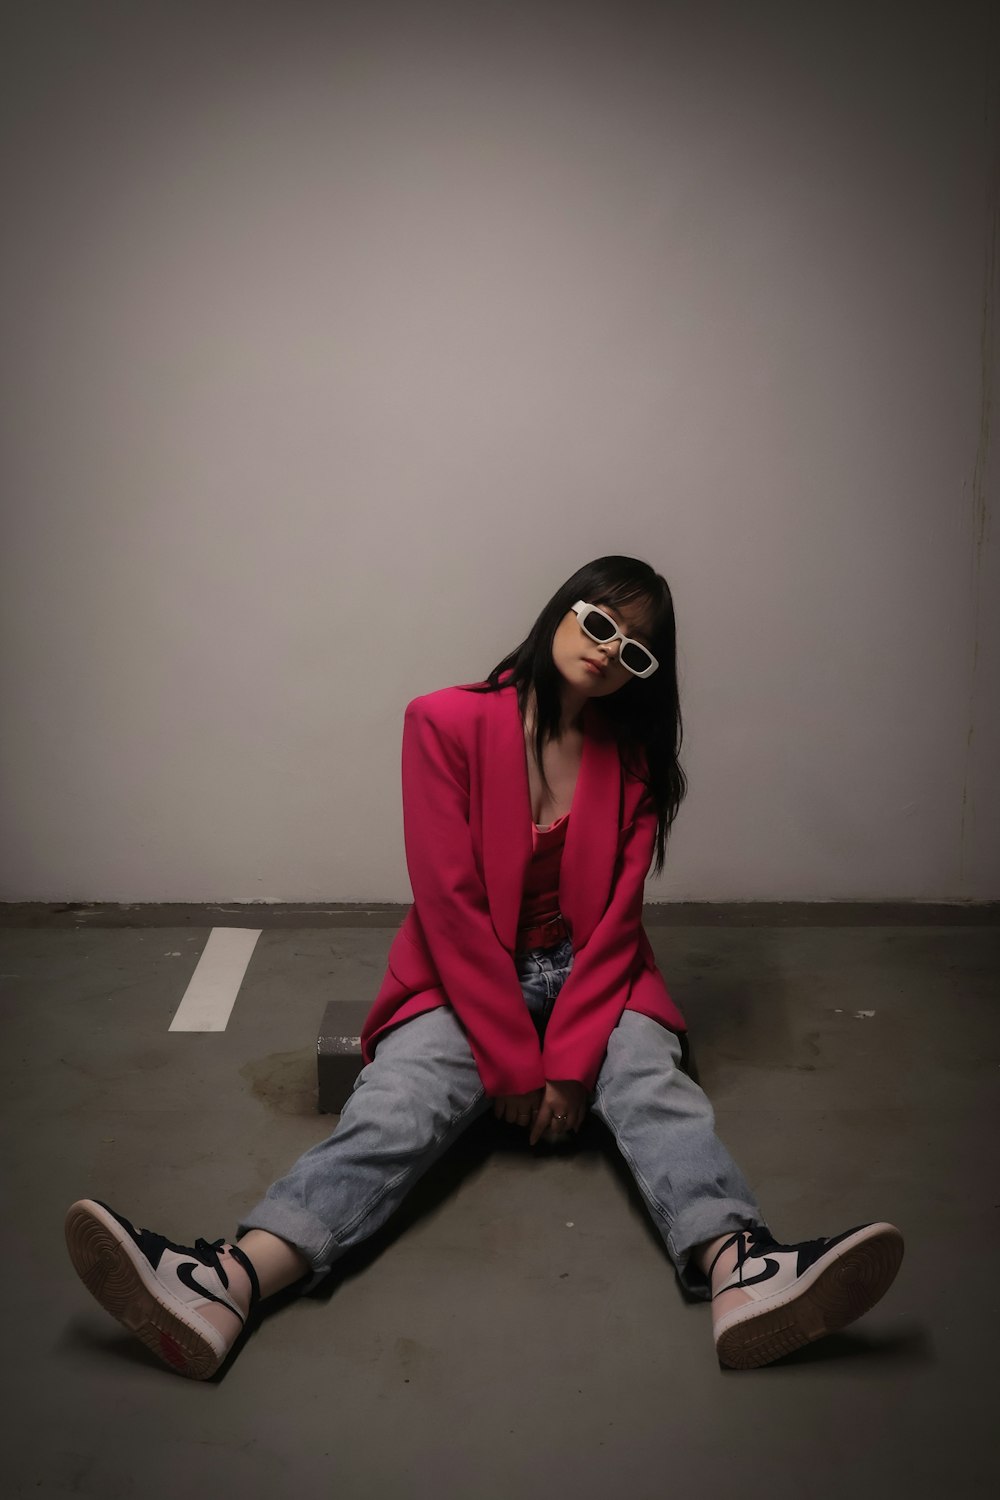 a woman sitting on the ground wearing sunglasses